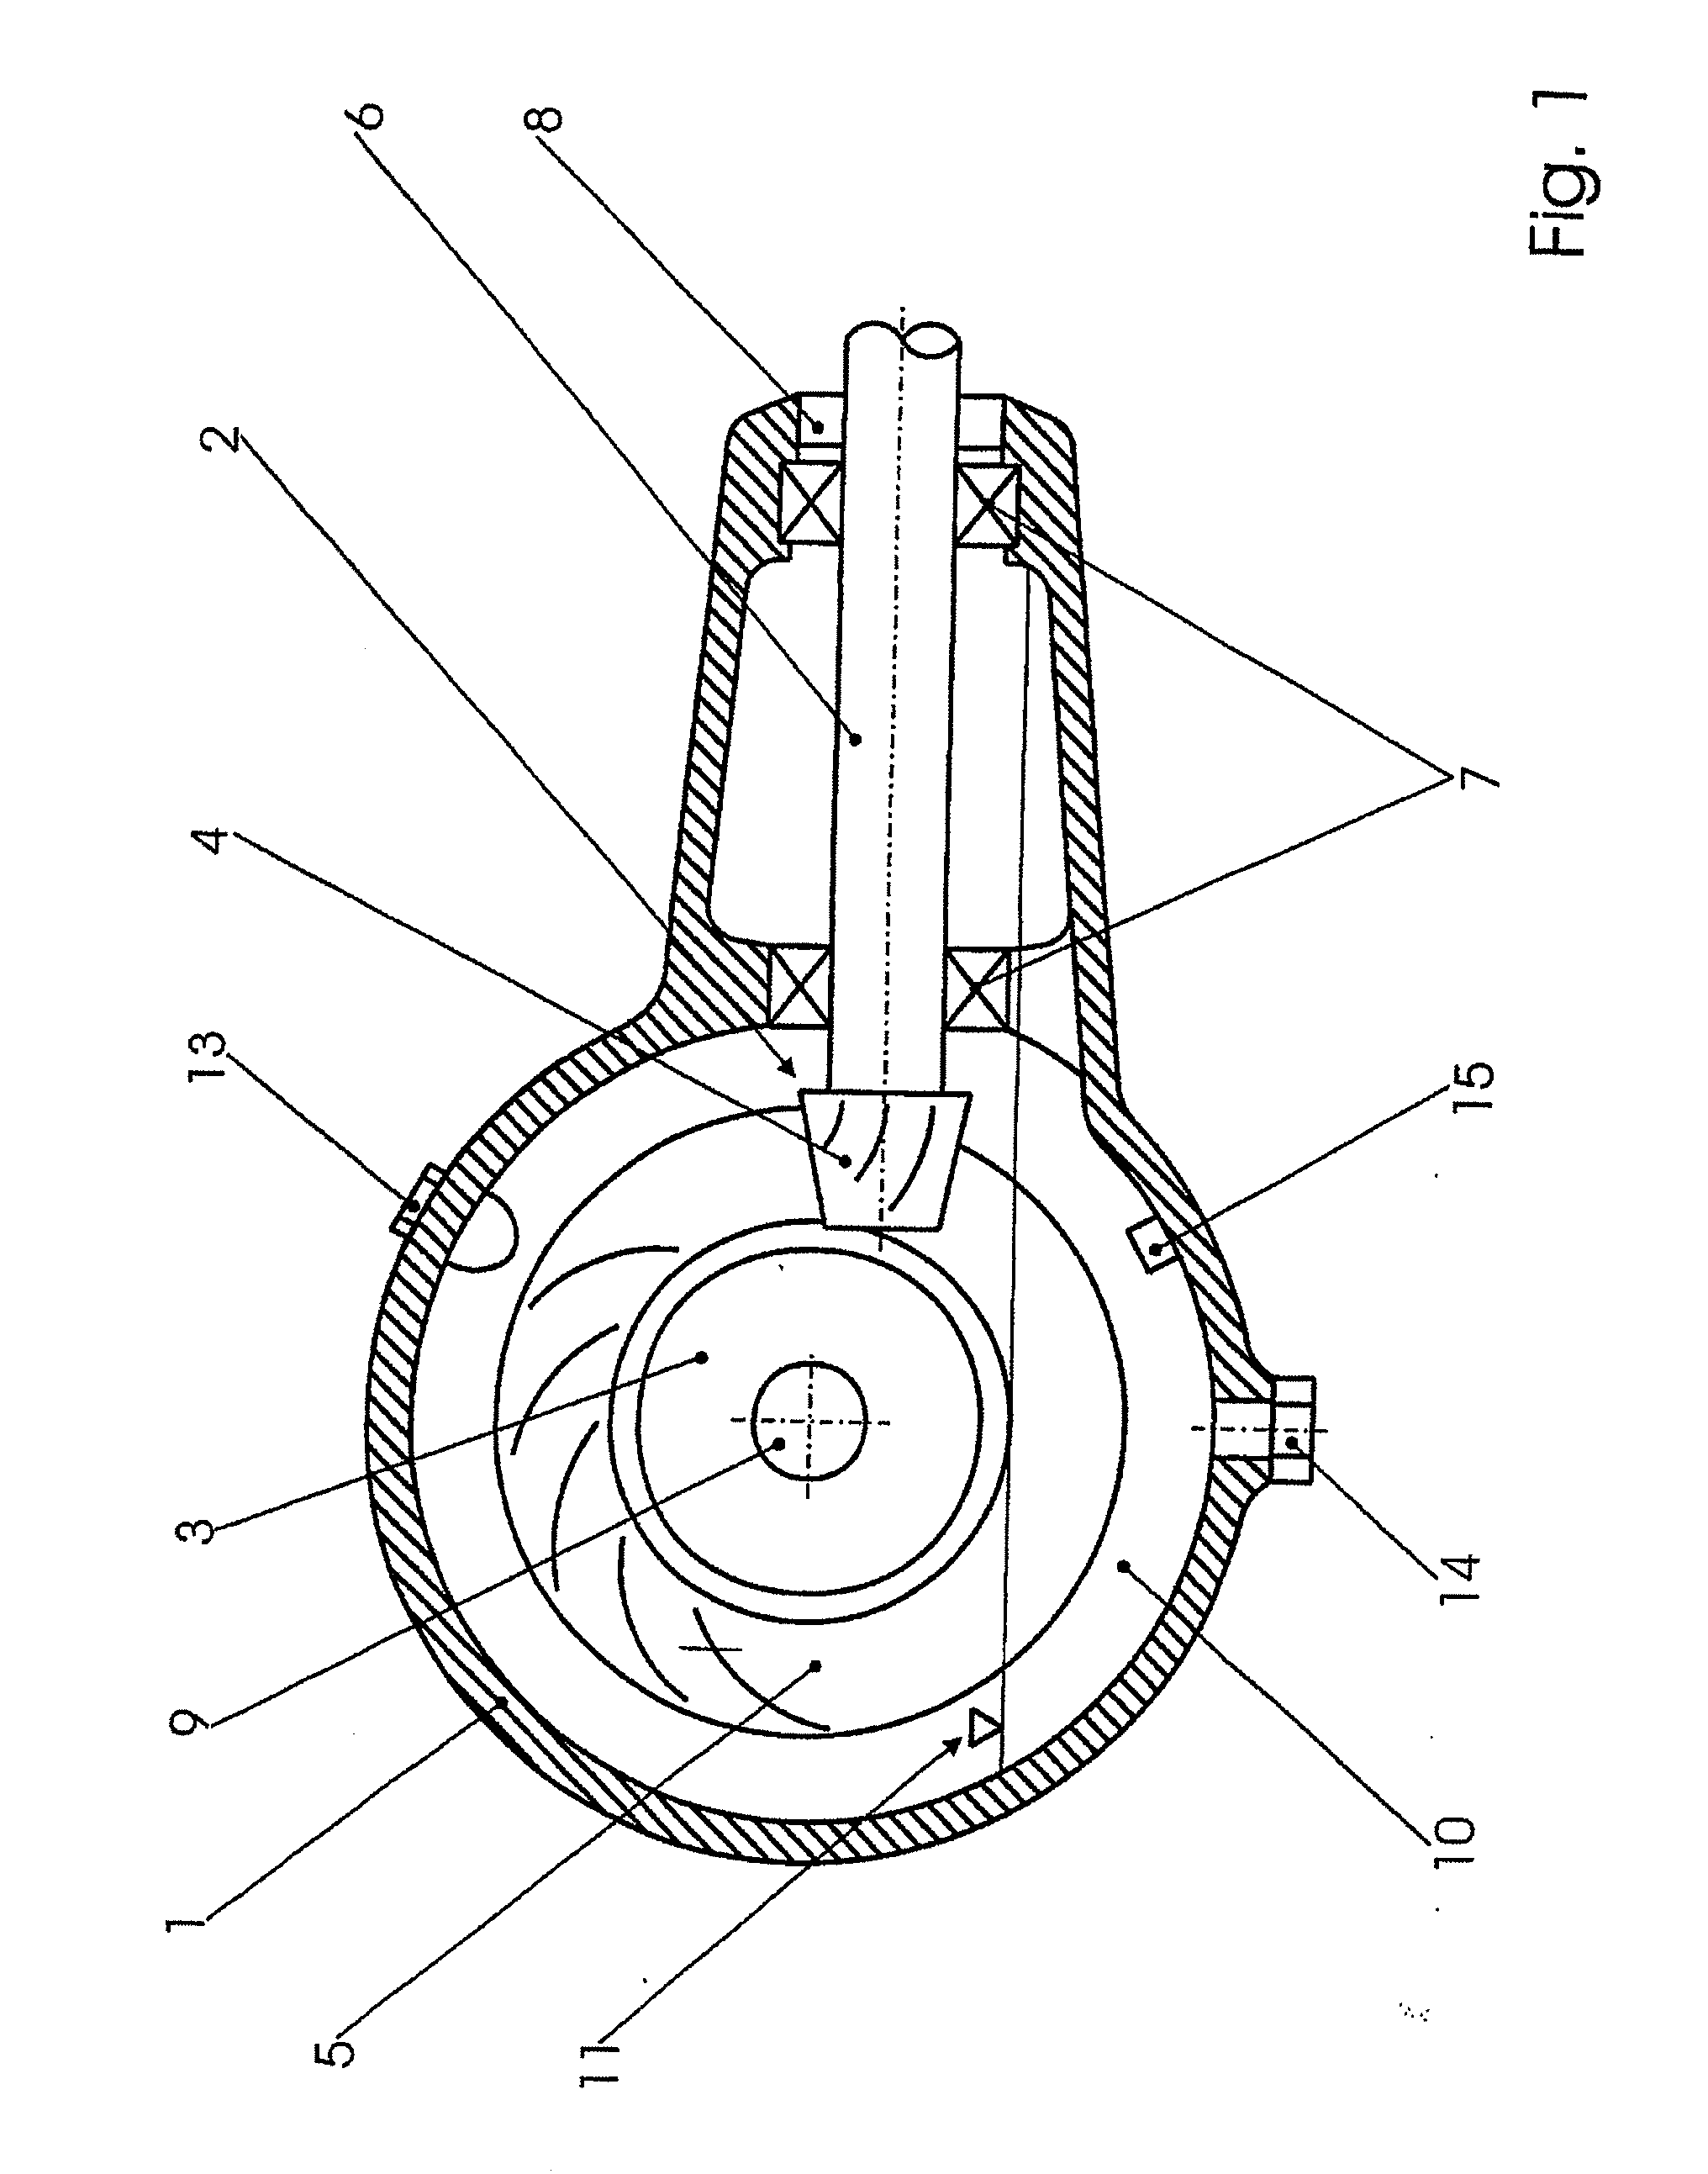 Operable transmission, working fluid for such a transmission, and method for commissioning the same